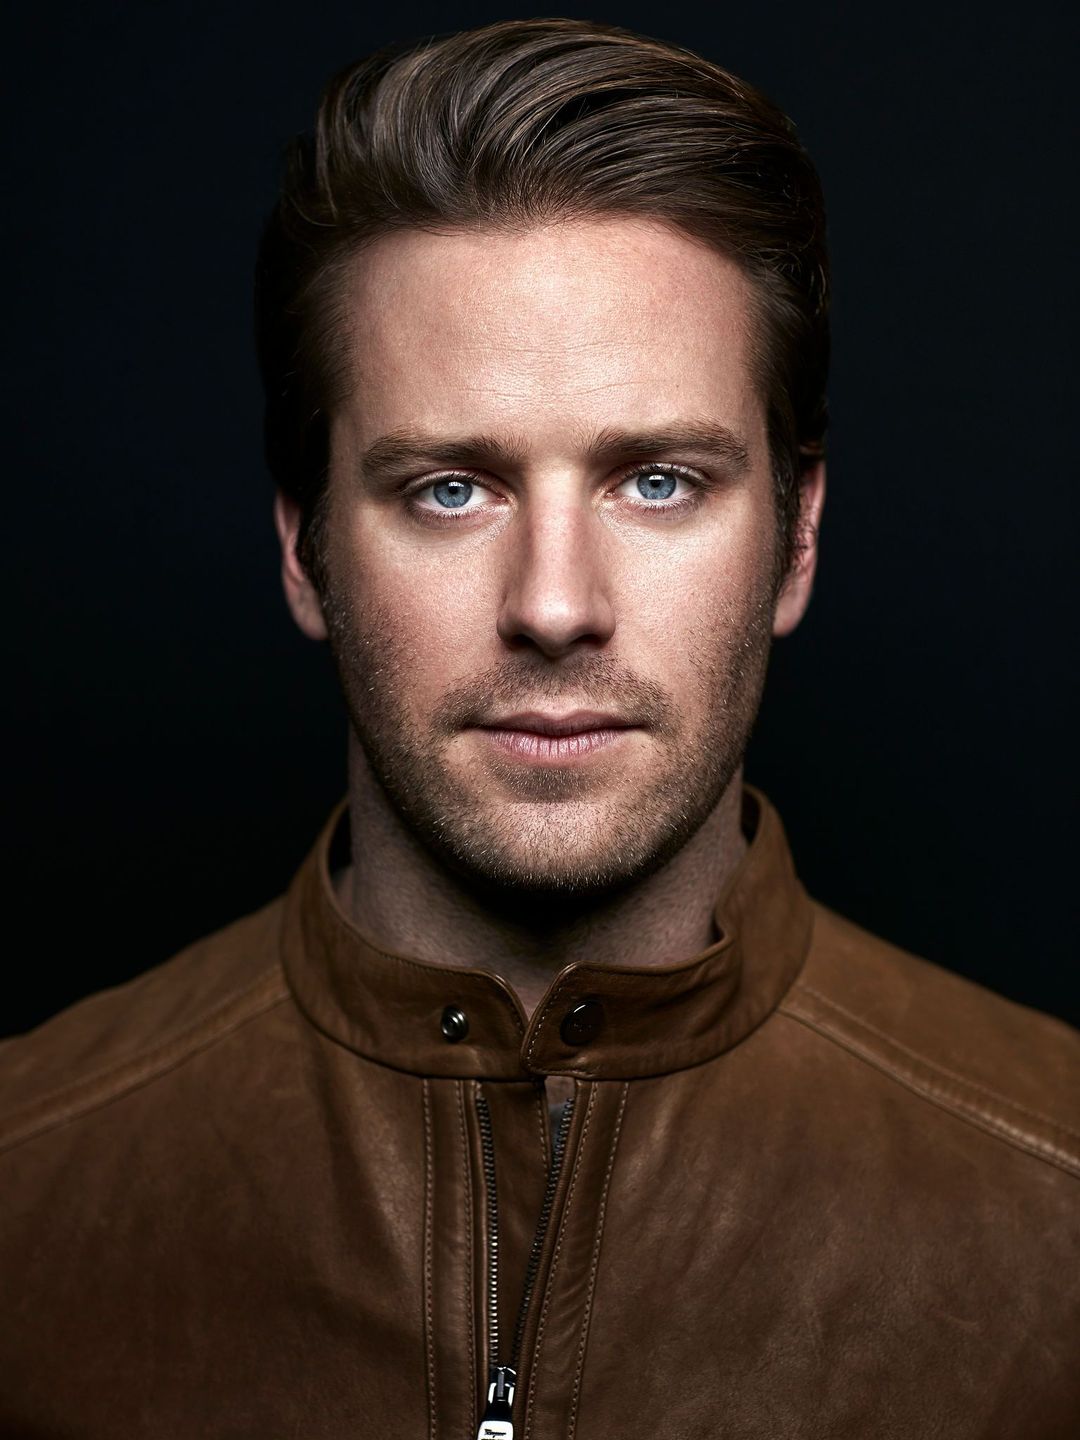 Armie Hammer who is his father